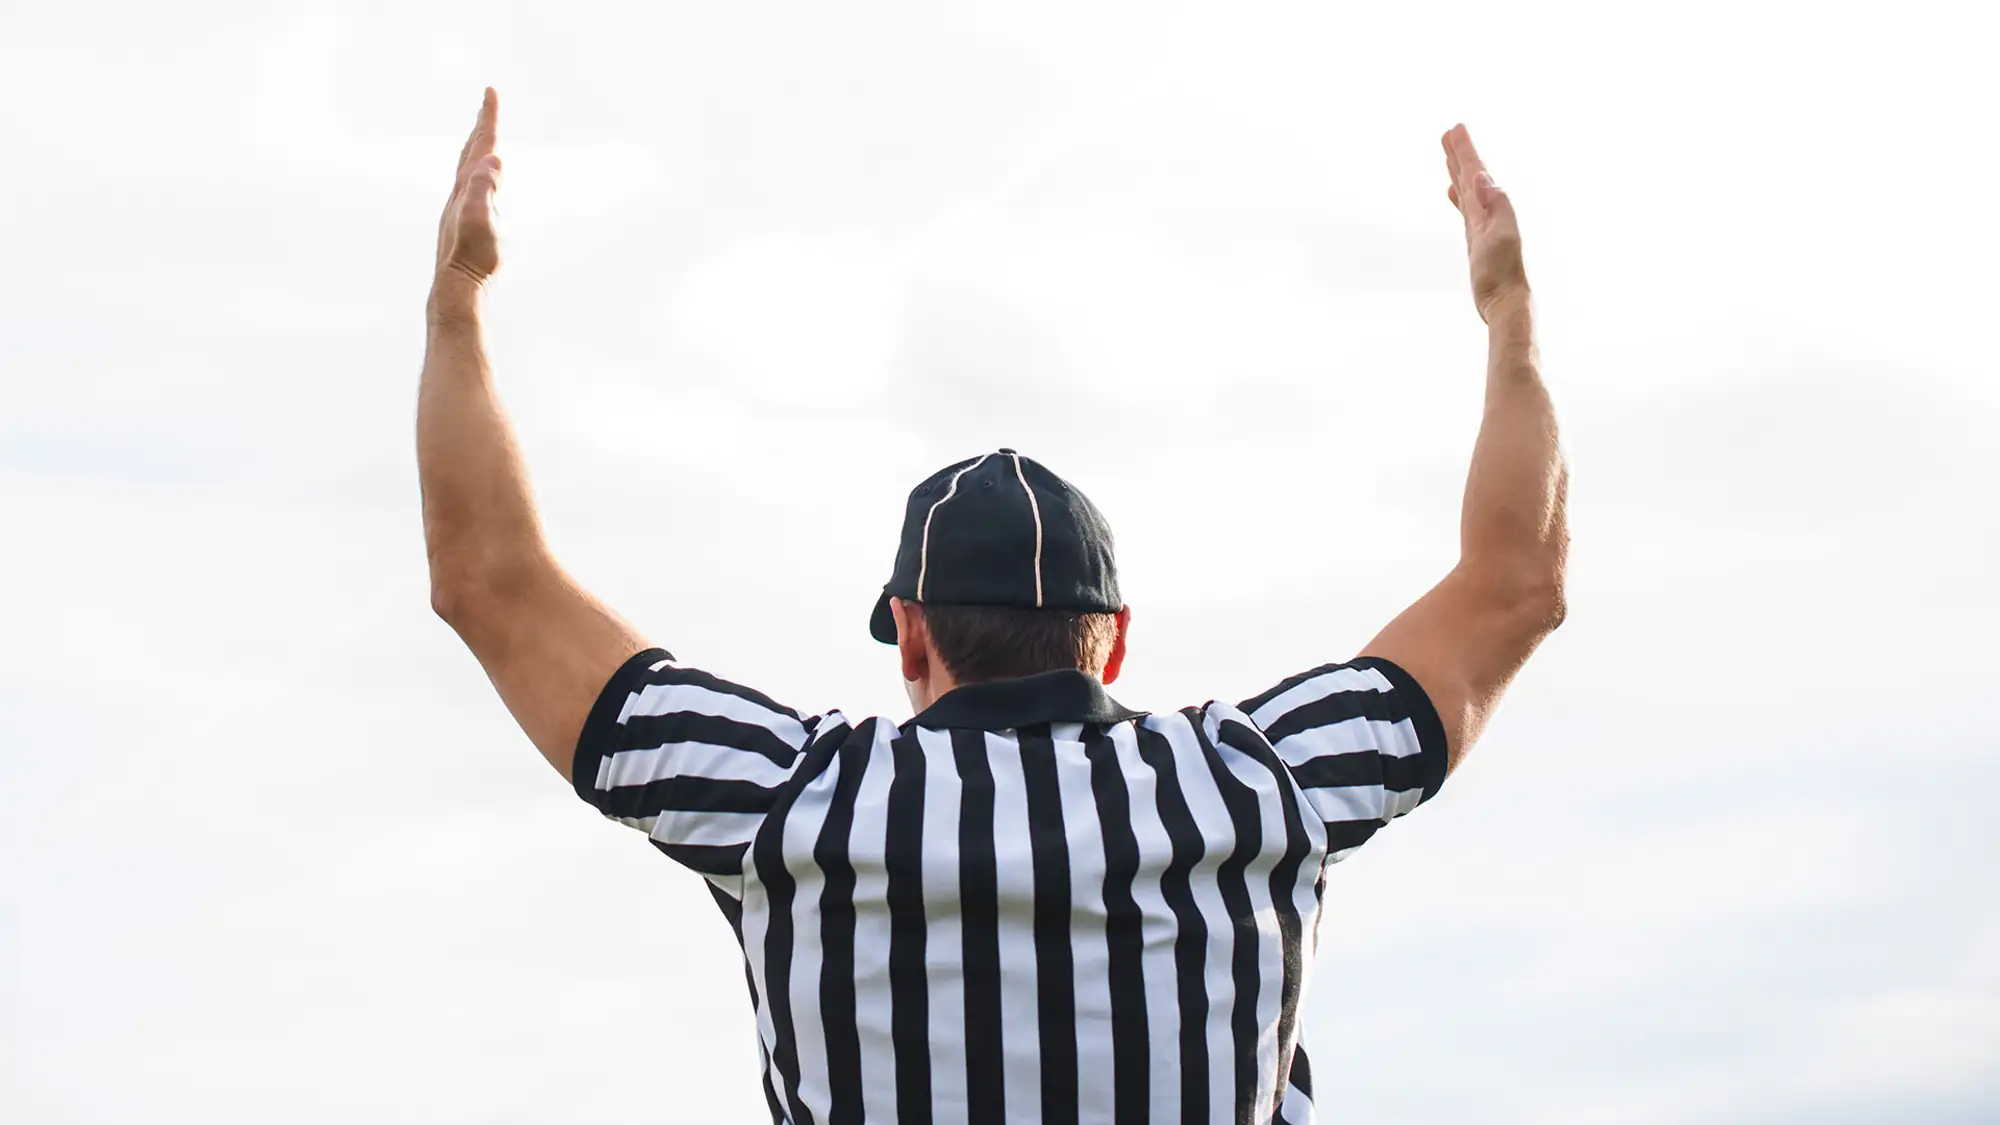 Football referee showing touchdown signal